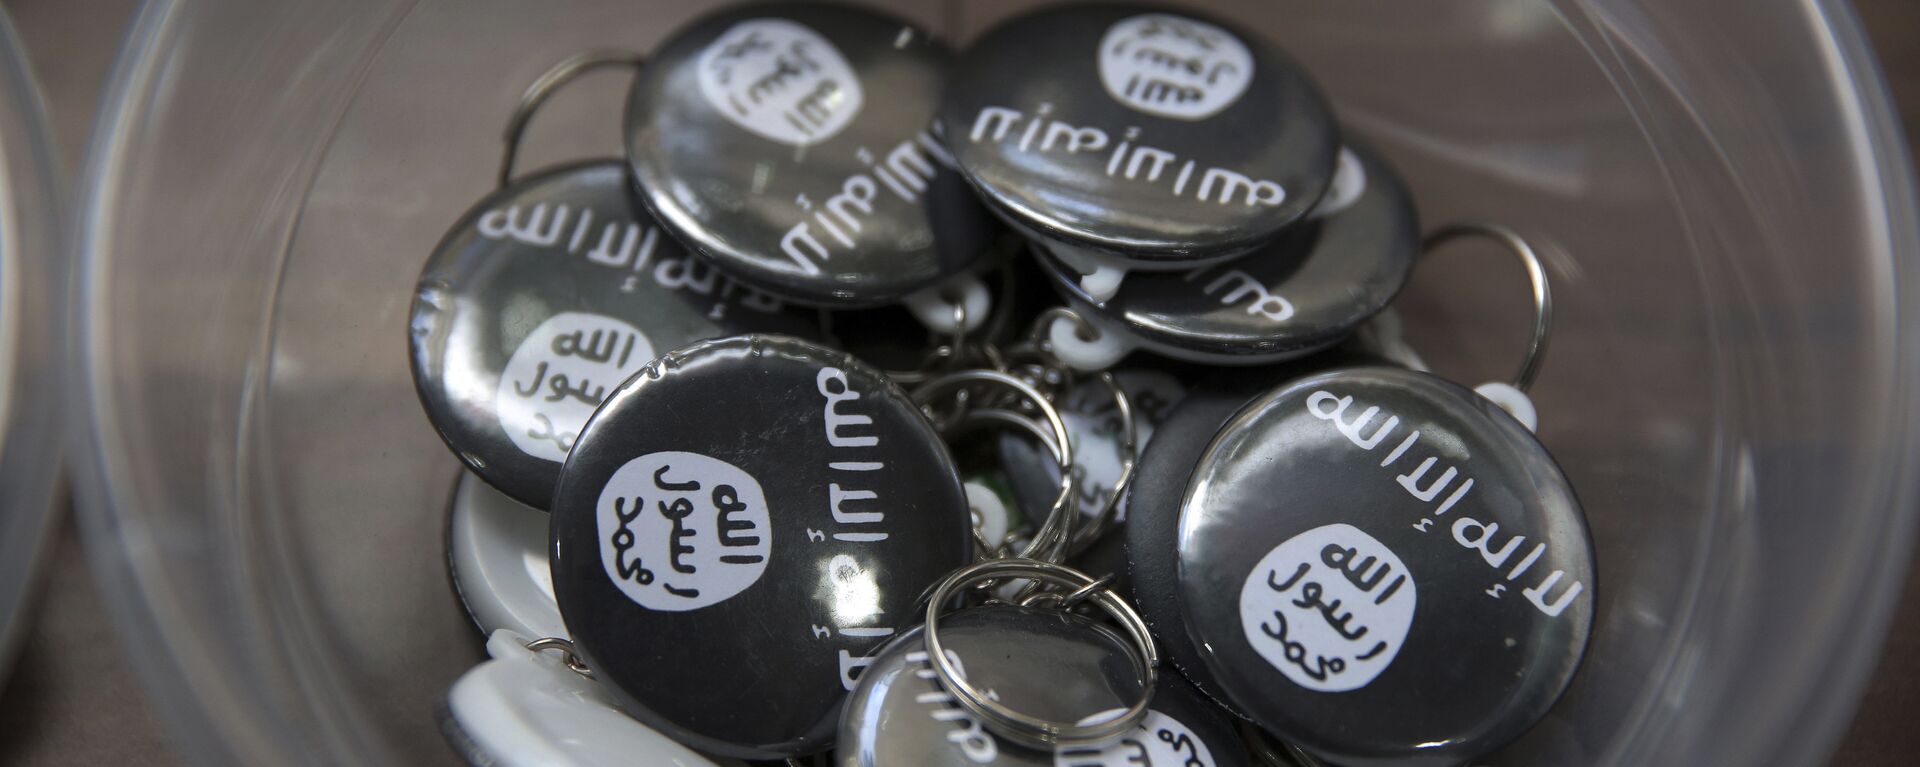 Islamic State group pins are on display at an Islamic bookstore where books about Islam, militant Islamic leaders and Islamic flags are displayed in the Fatih district of Istanbul, Monday, Oct. 13, 2014 - Sputnik Afrique, 1920, 25.01.2022